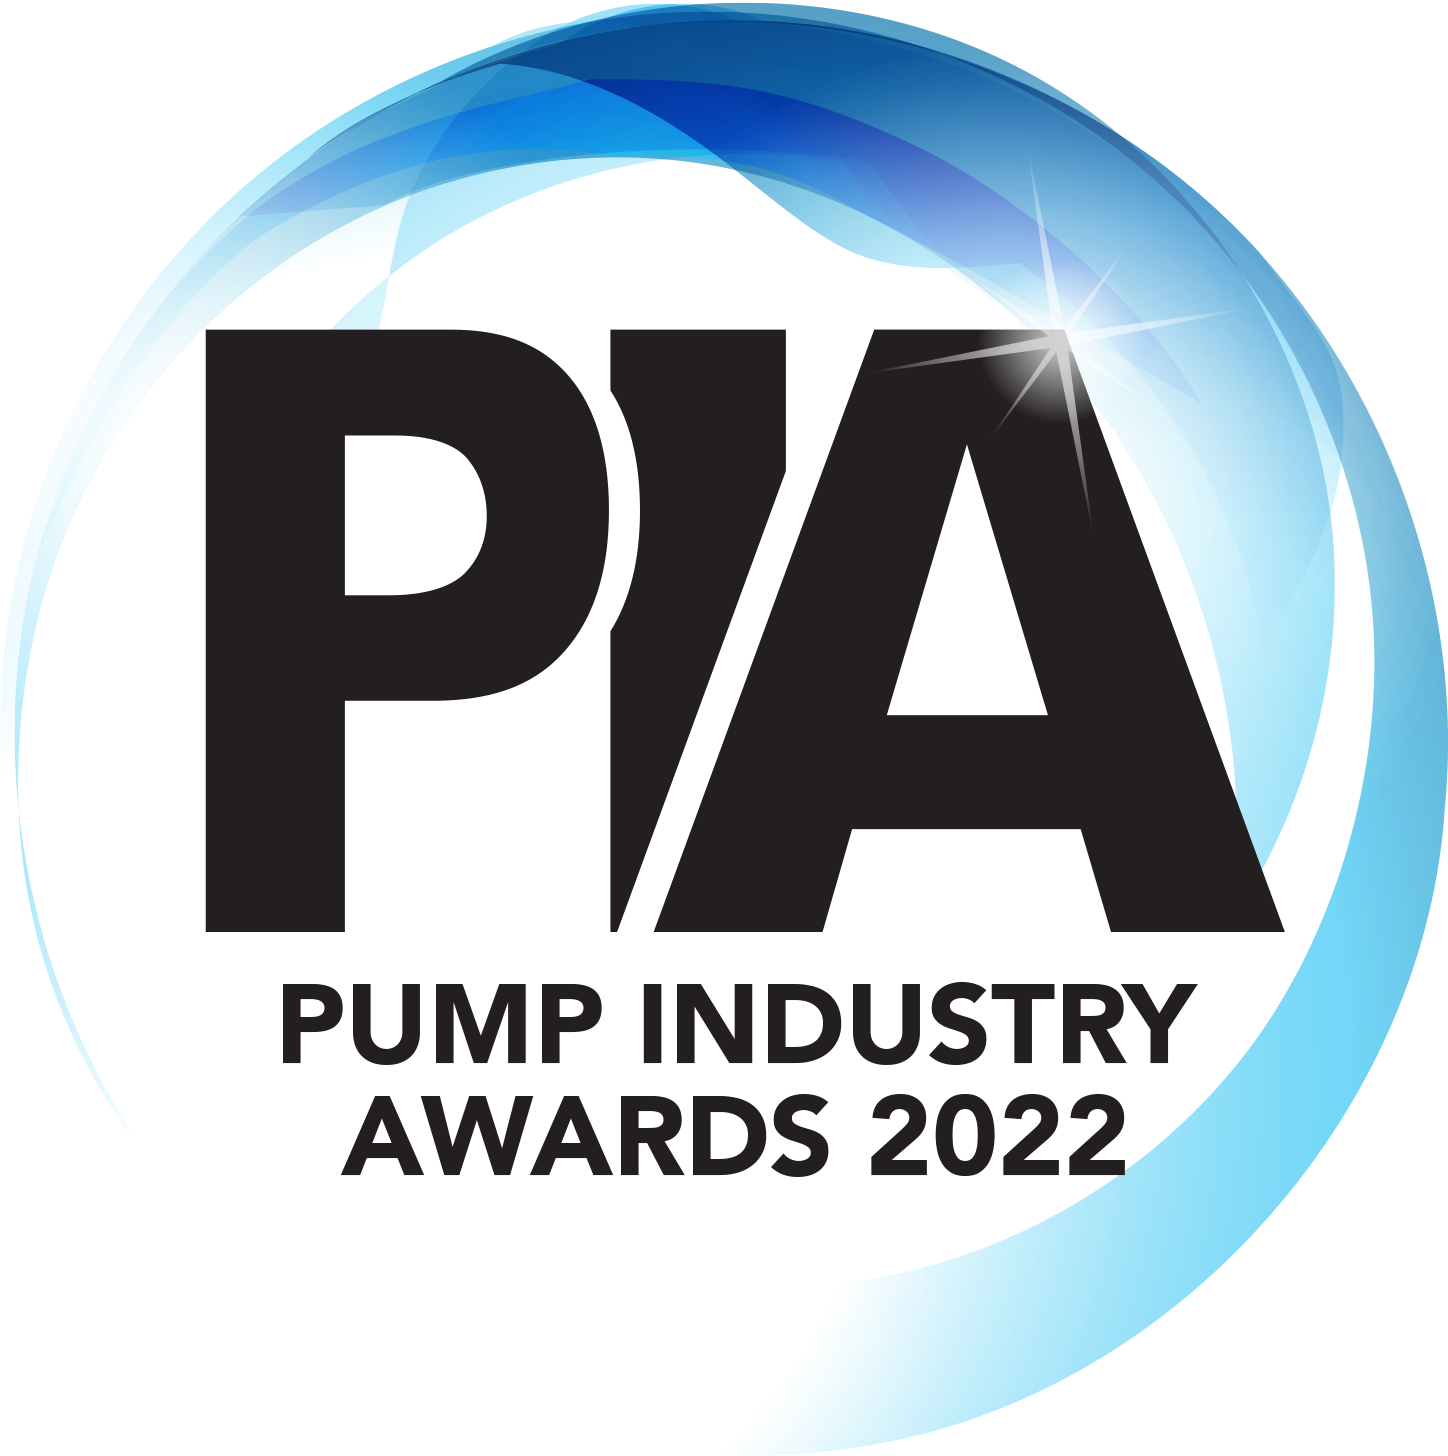 The deadline for nominations for the 2022 Pump Industry Awards is 7 January.